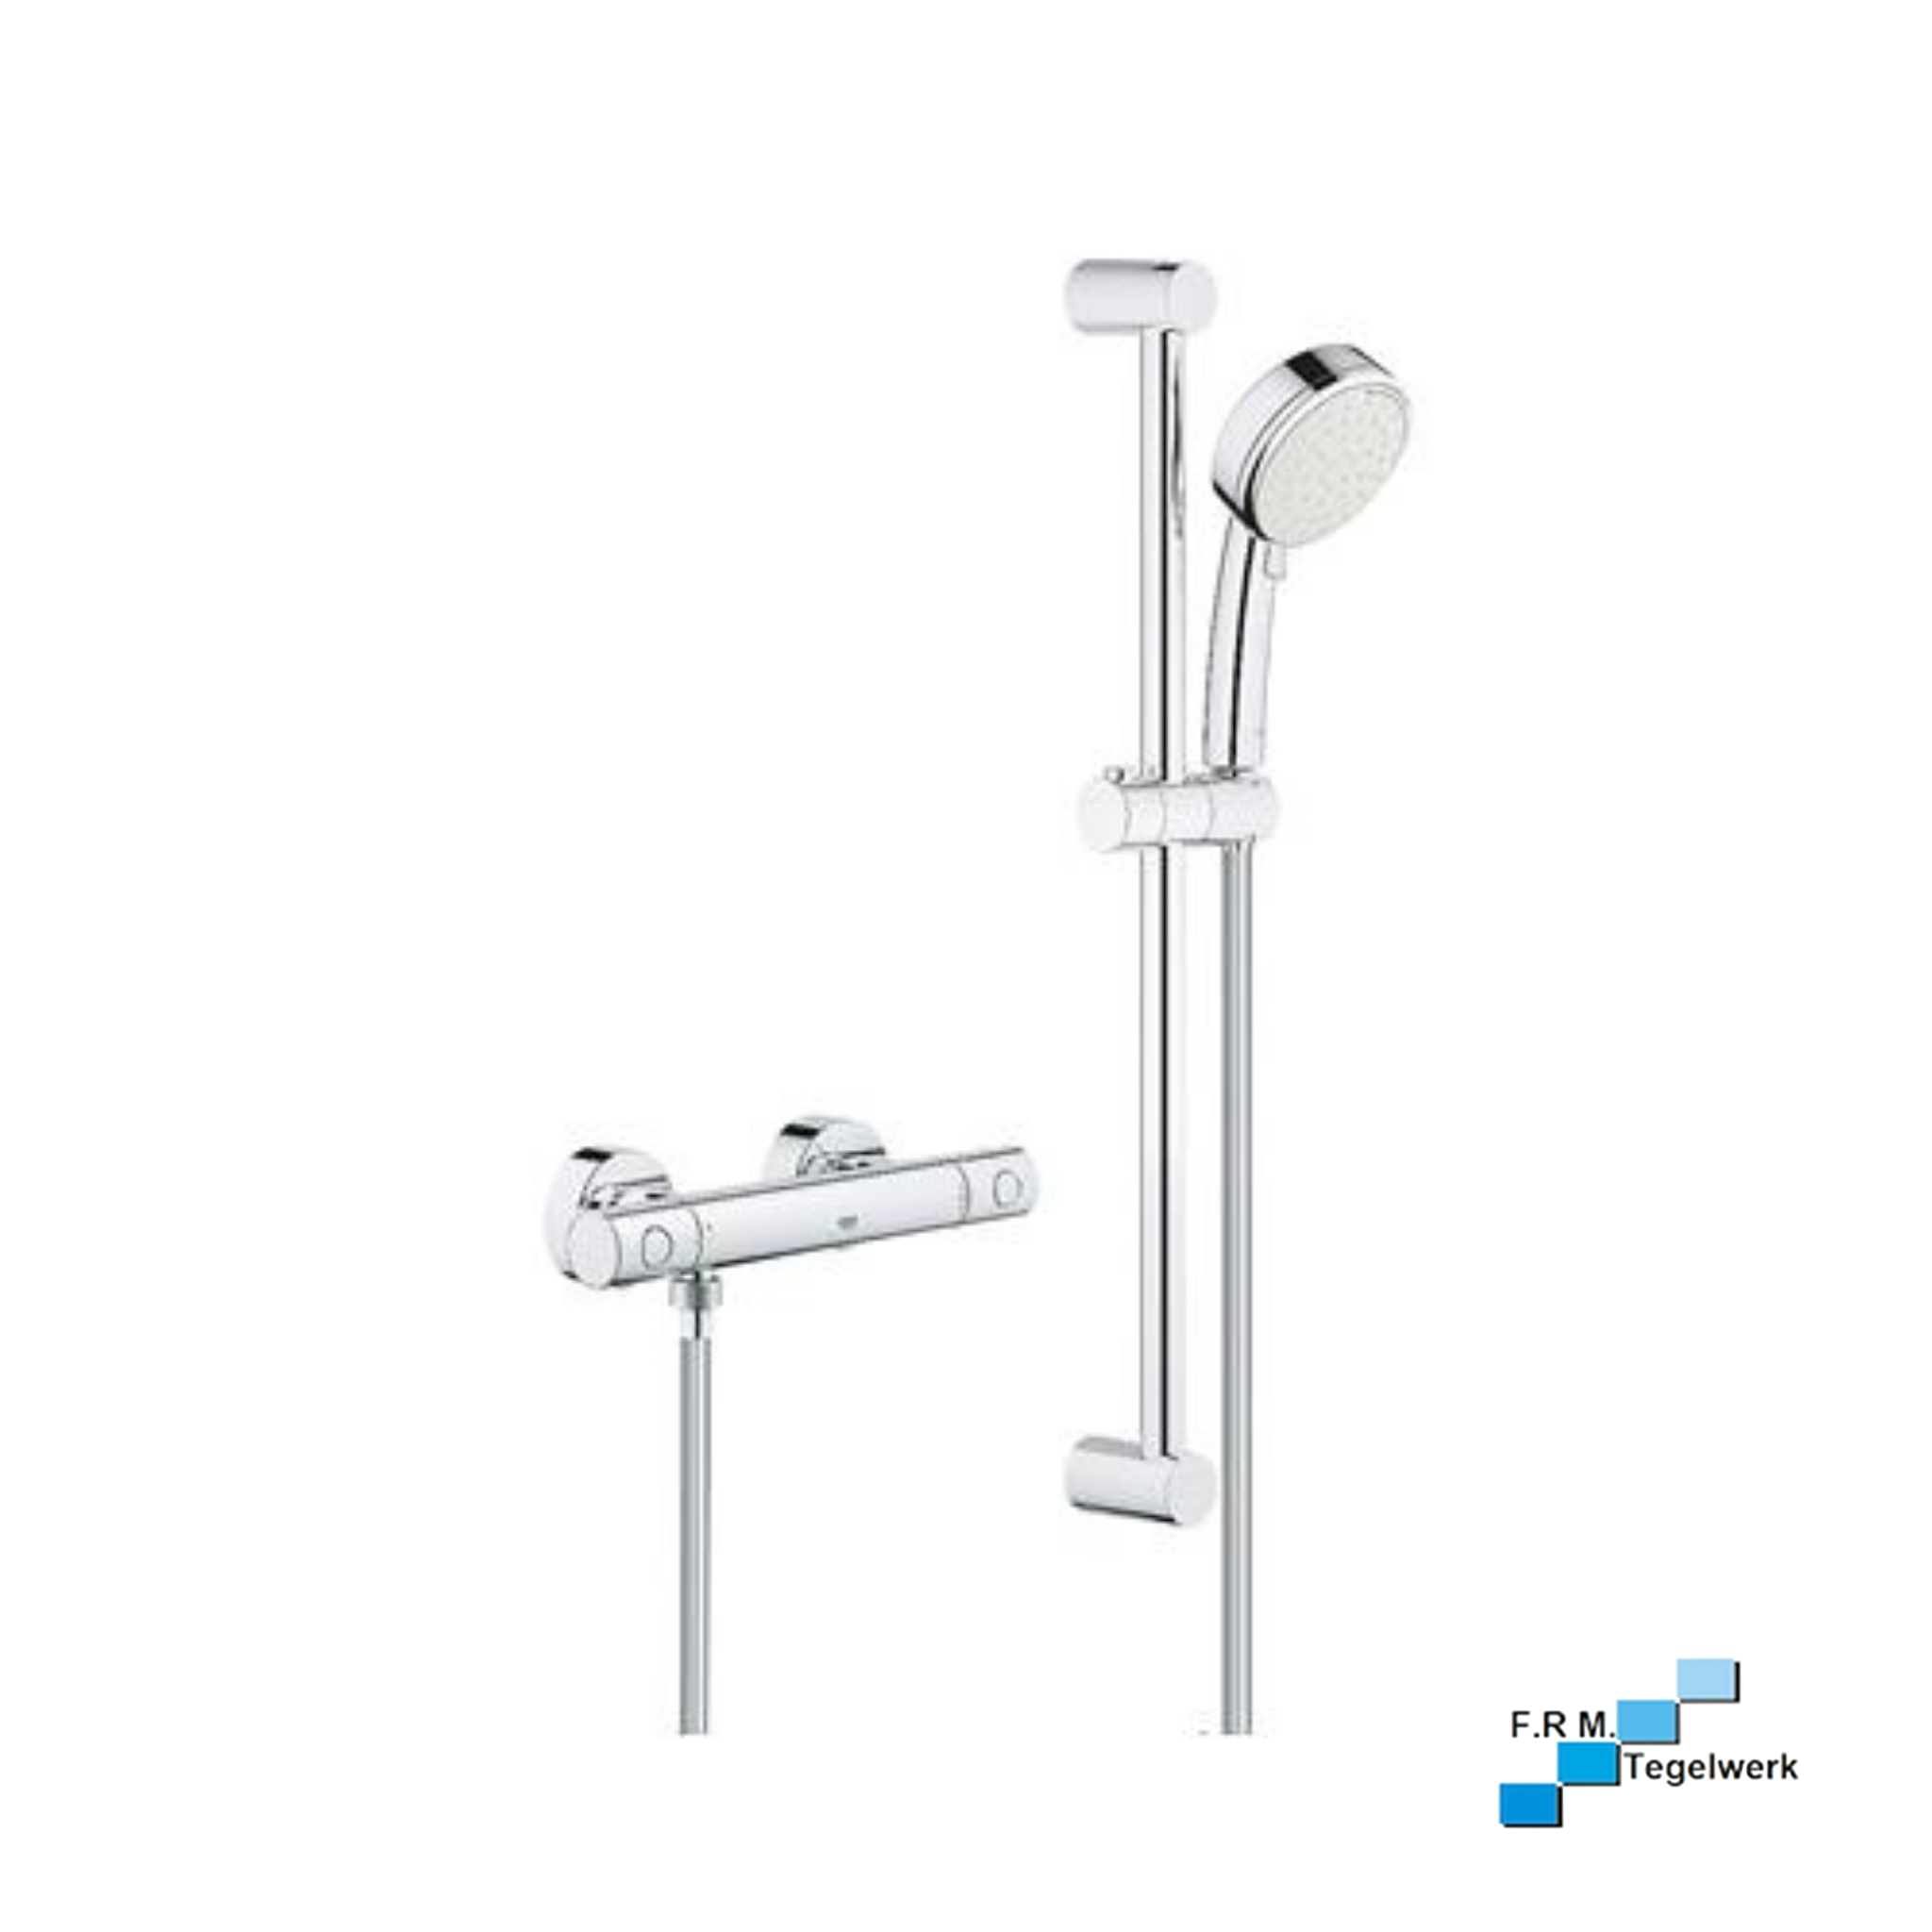 Grohe Grohtherm 800 60 | Bij FRM